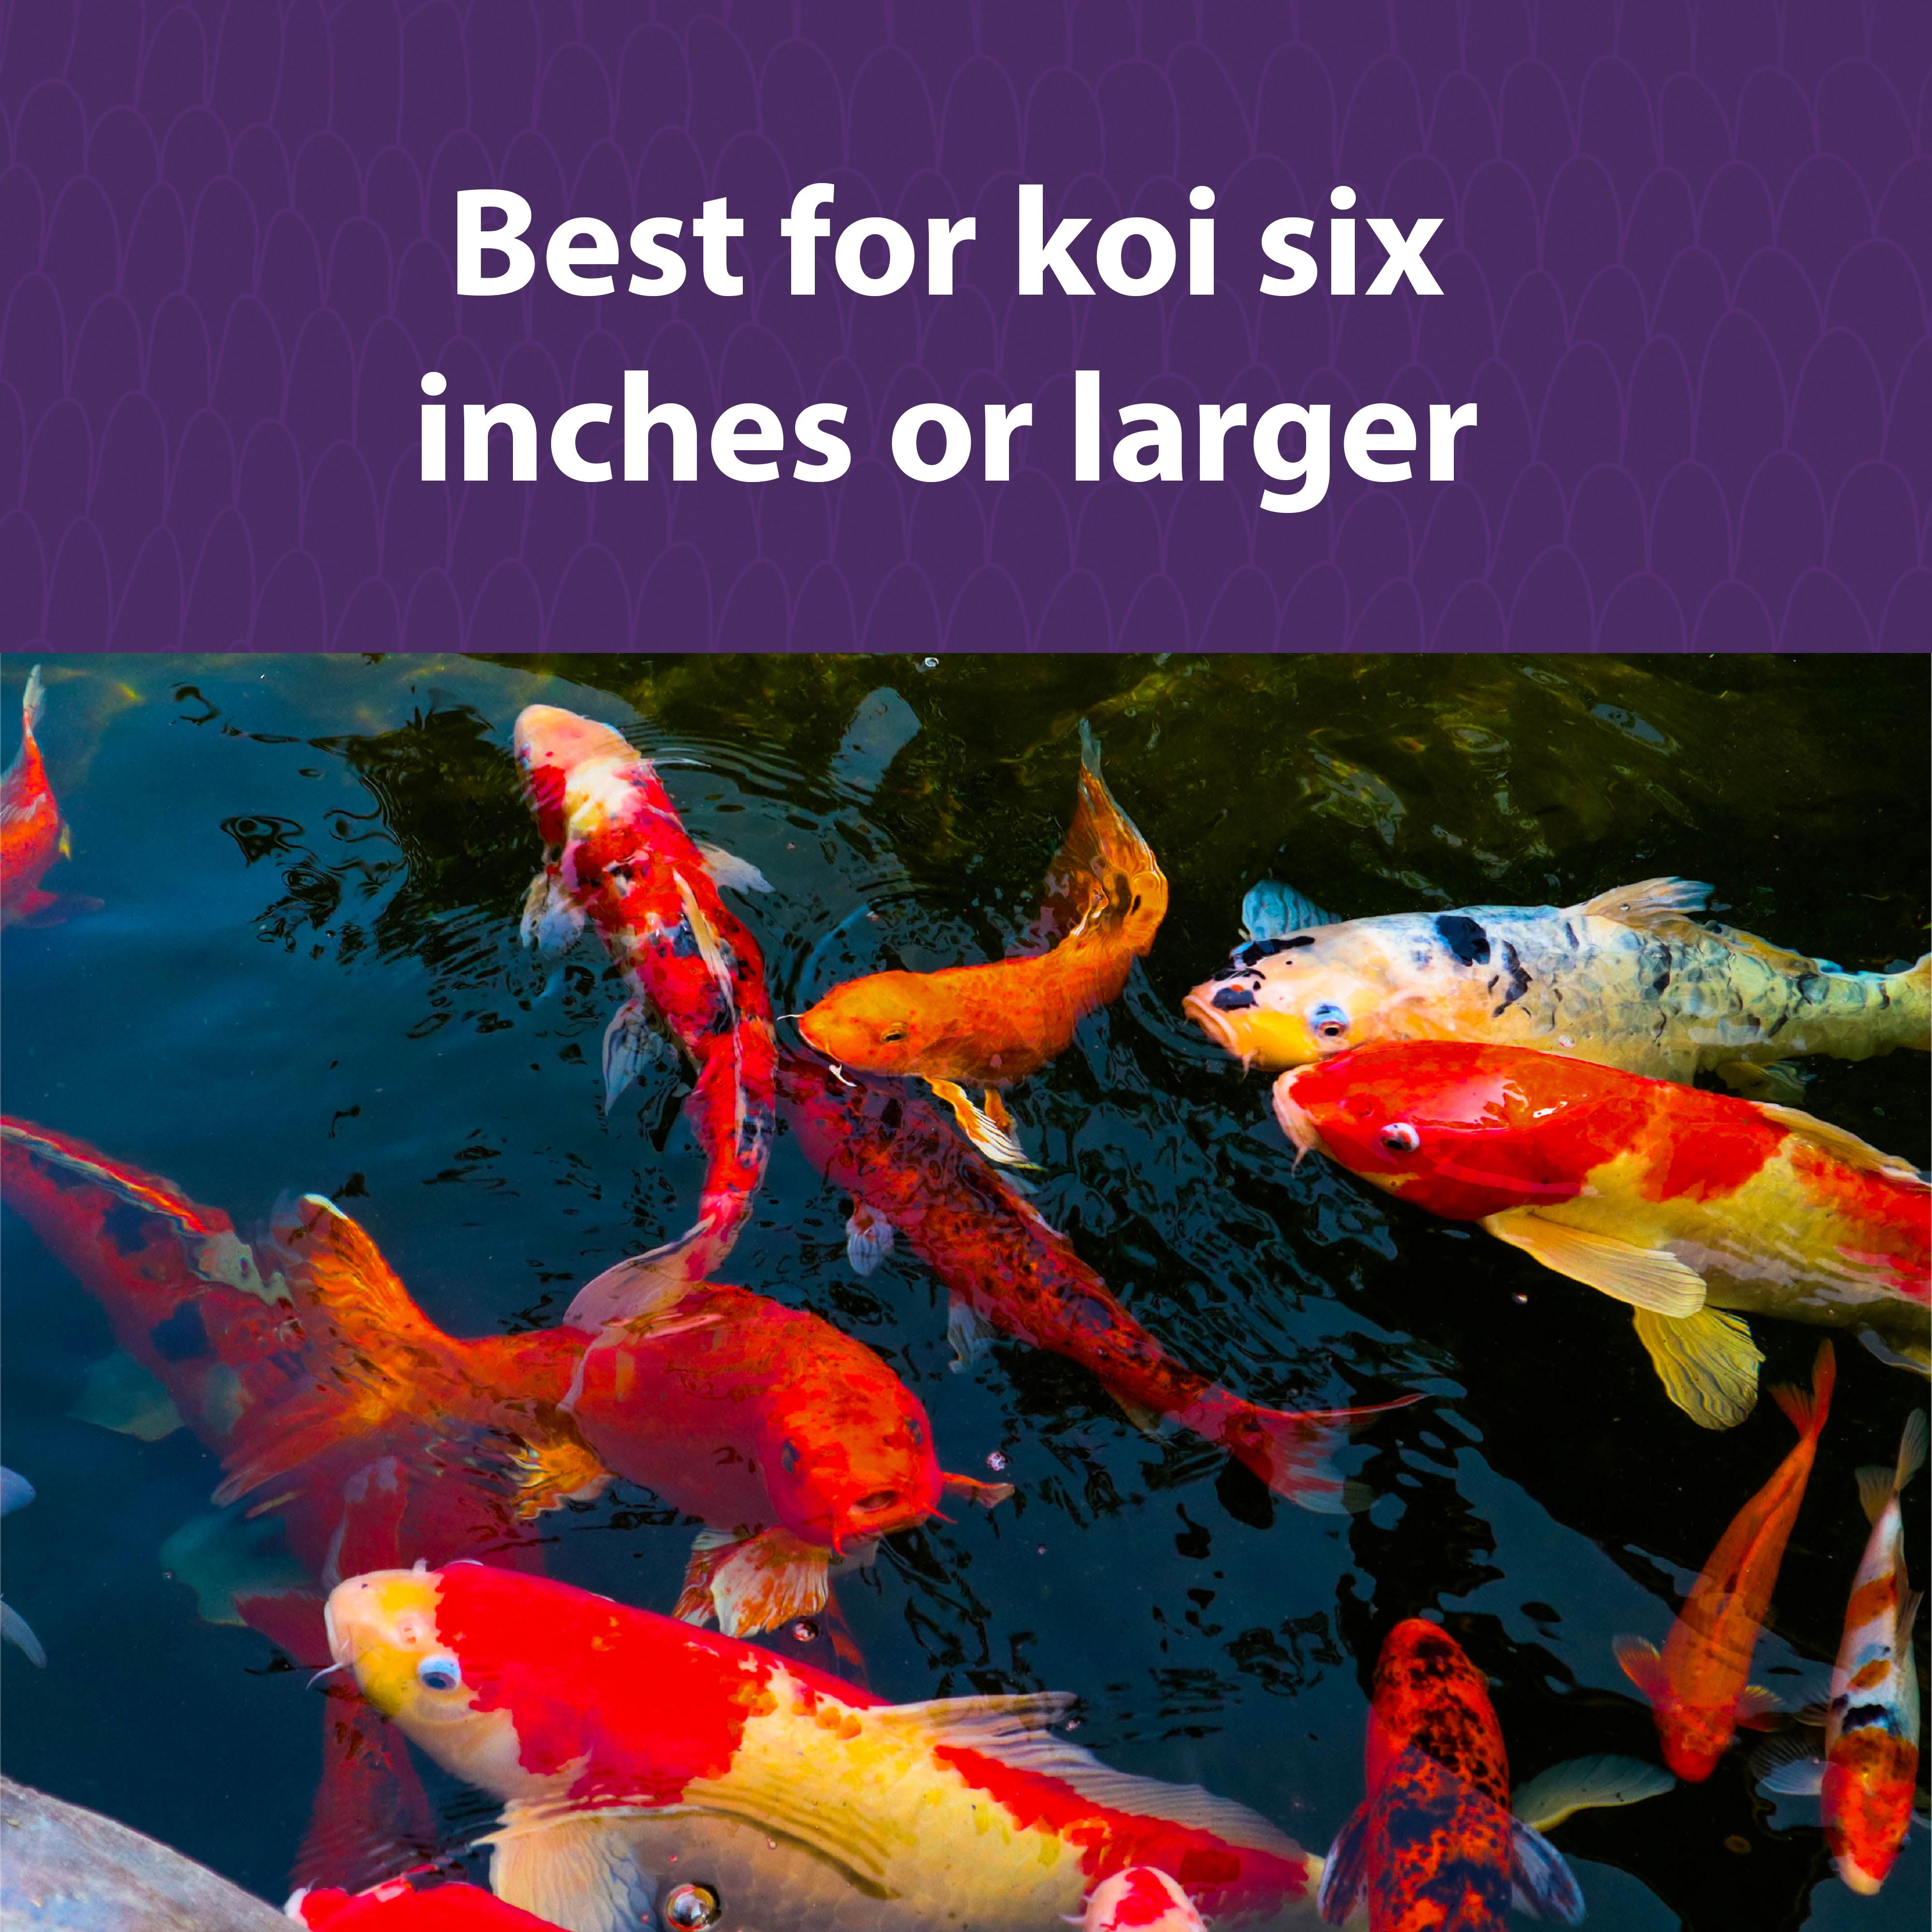 Best for Koi 6 inches or larger